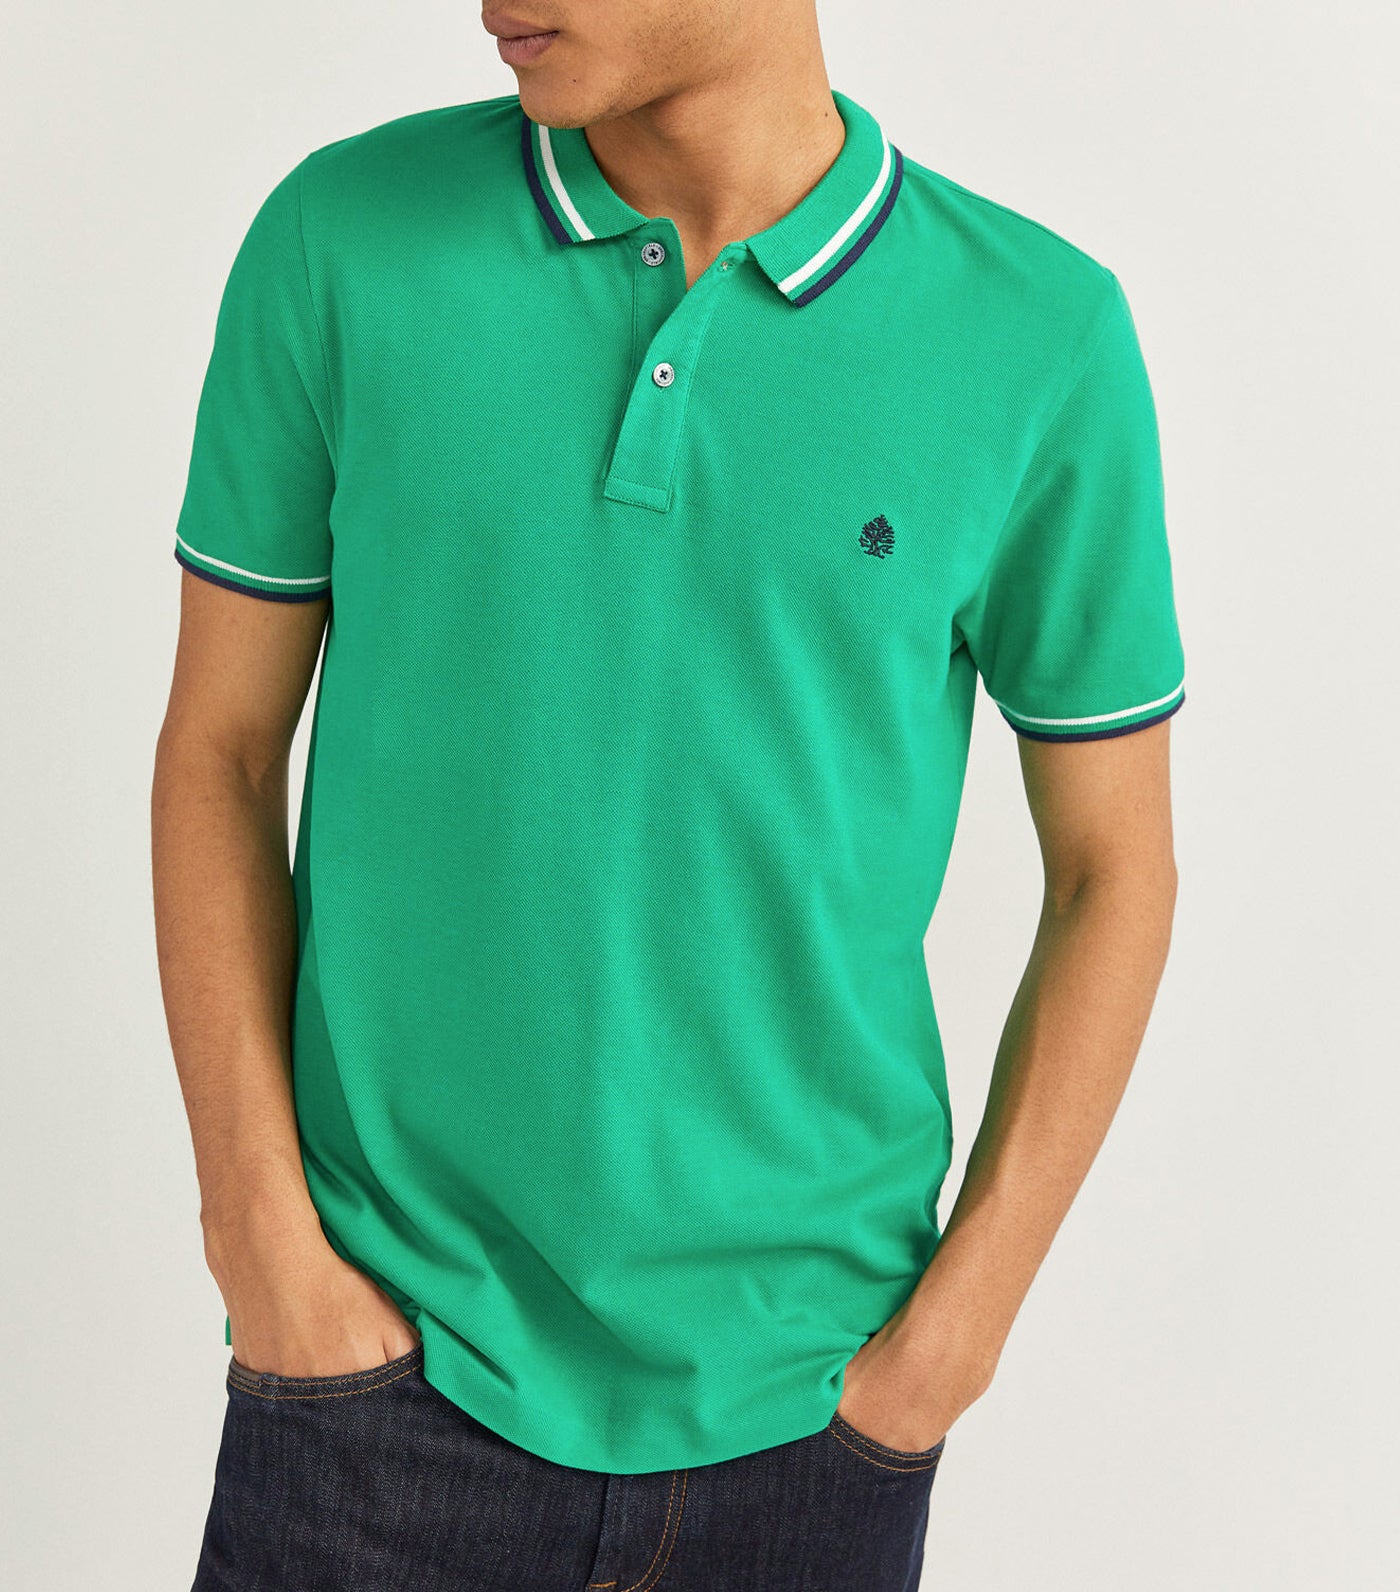 springfield slim fit tipped polo shirt - green